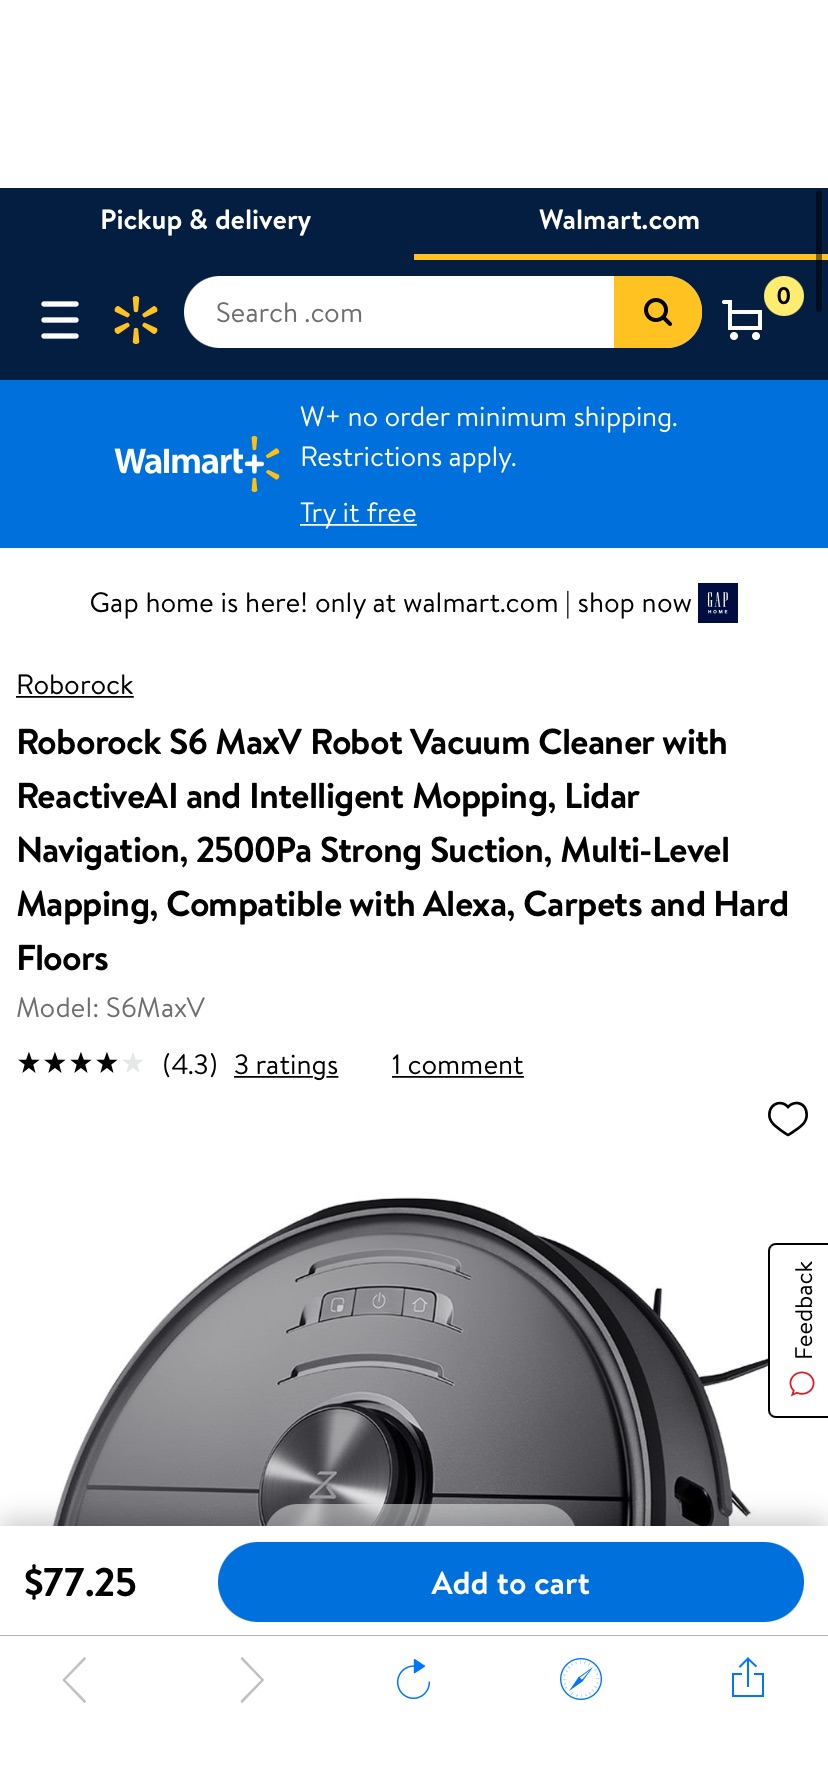 Roborock S6 MaxV Robot Vacuum Cleaner with ReactiveAI and Intelligent Mopping, Lidar Navigation, 2500Pa Strong Suction, Multi-Level Mapping, Compatible with Alexa, Carpets and Hard Floors - 石头扫地机器人